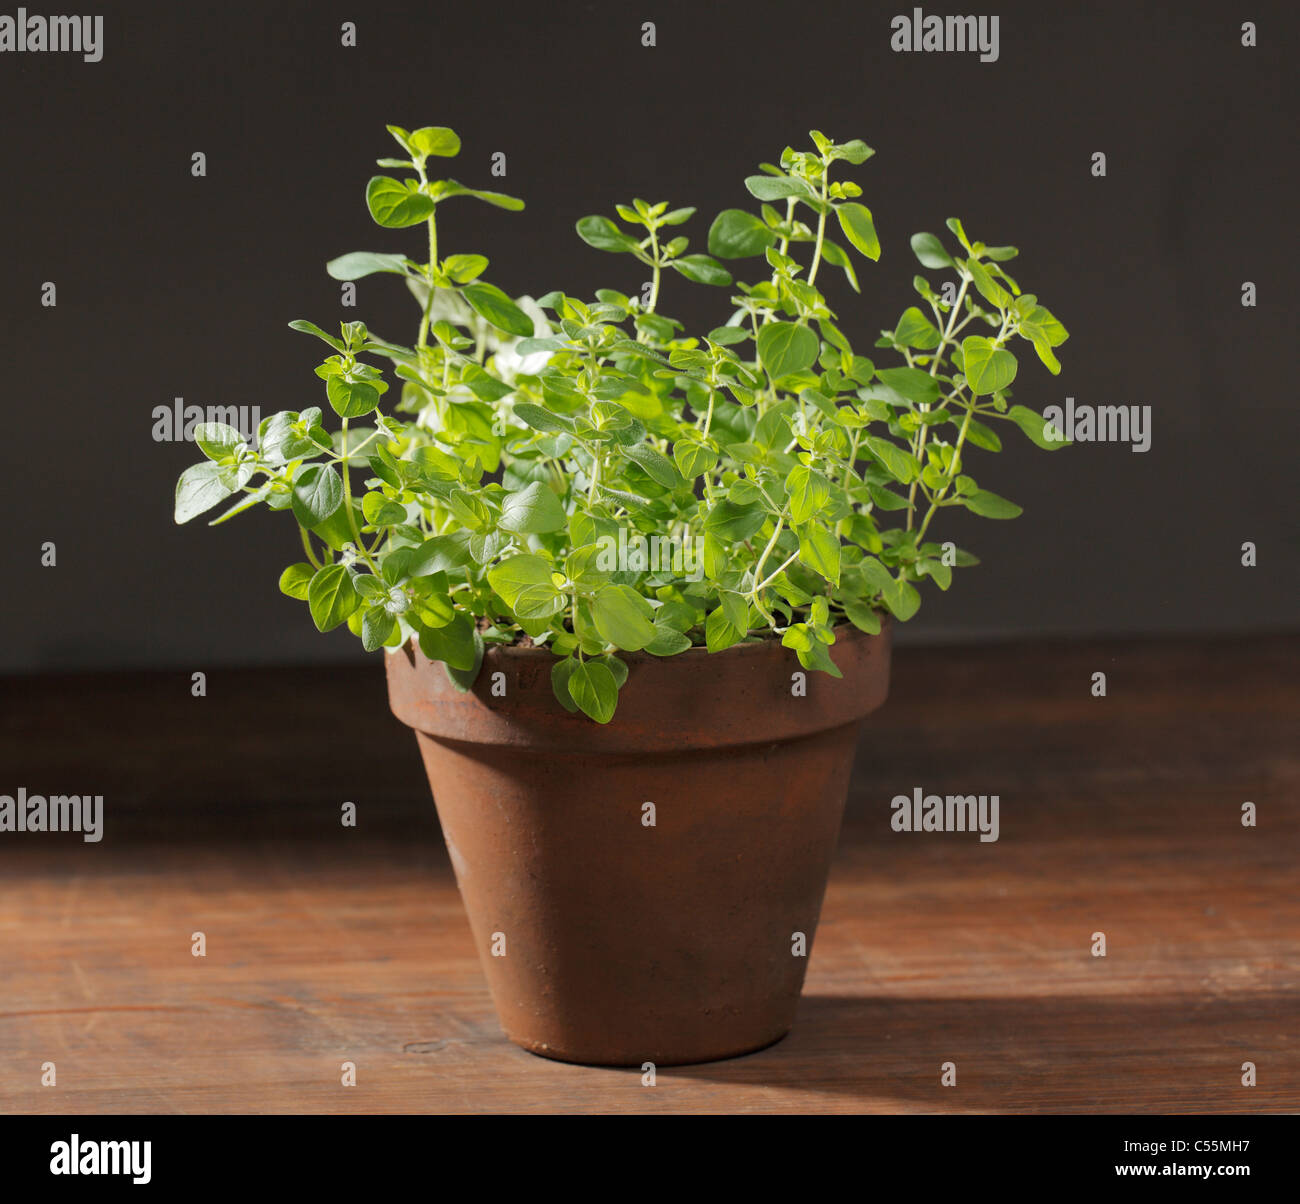 Potted Oregano herbal plant on wooden table. Stock Photo